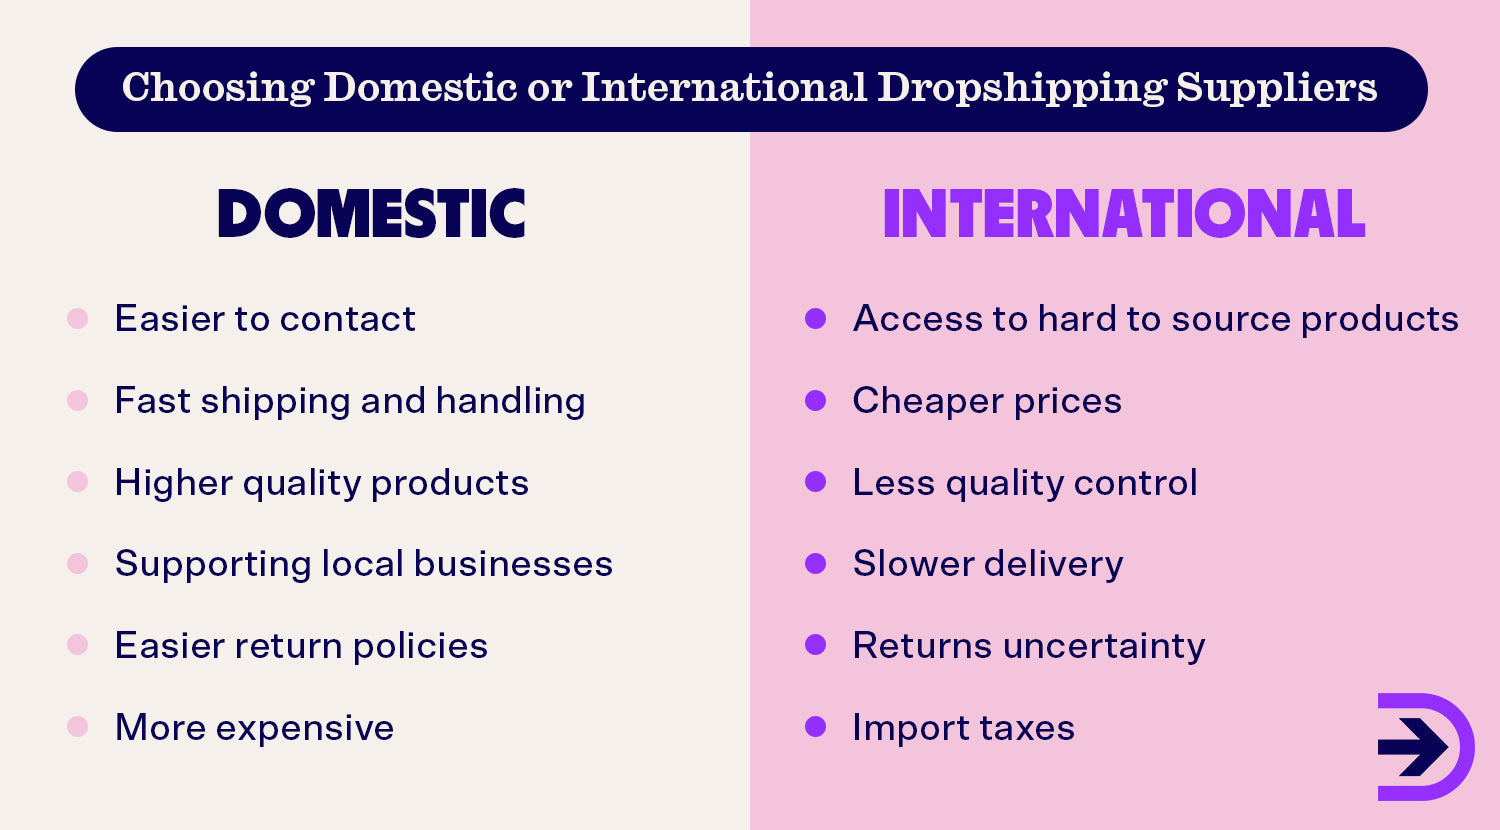 Domestic dropshipping suppliers have many advantages such as faster shipping and higher quality but sourcing internationally can lead to higher margins.